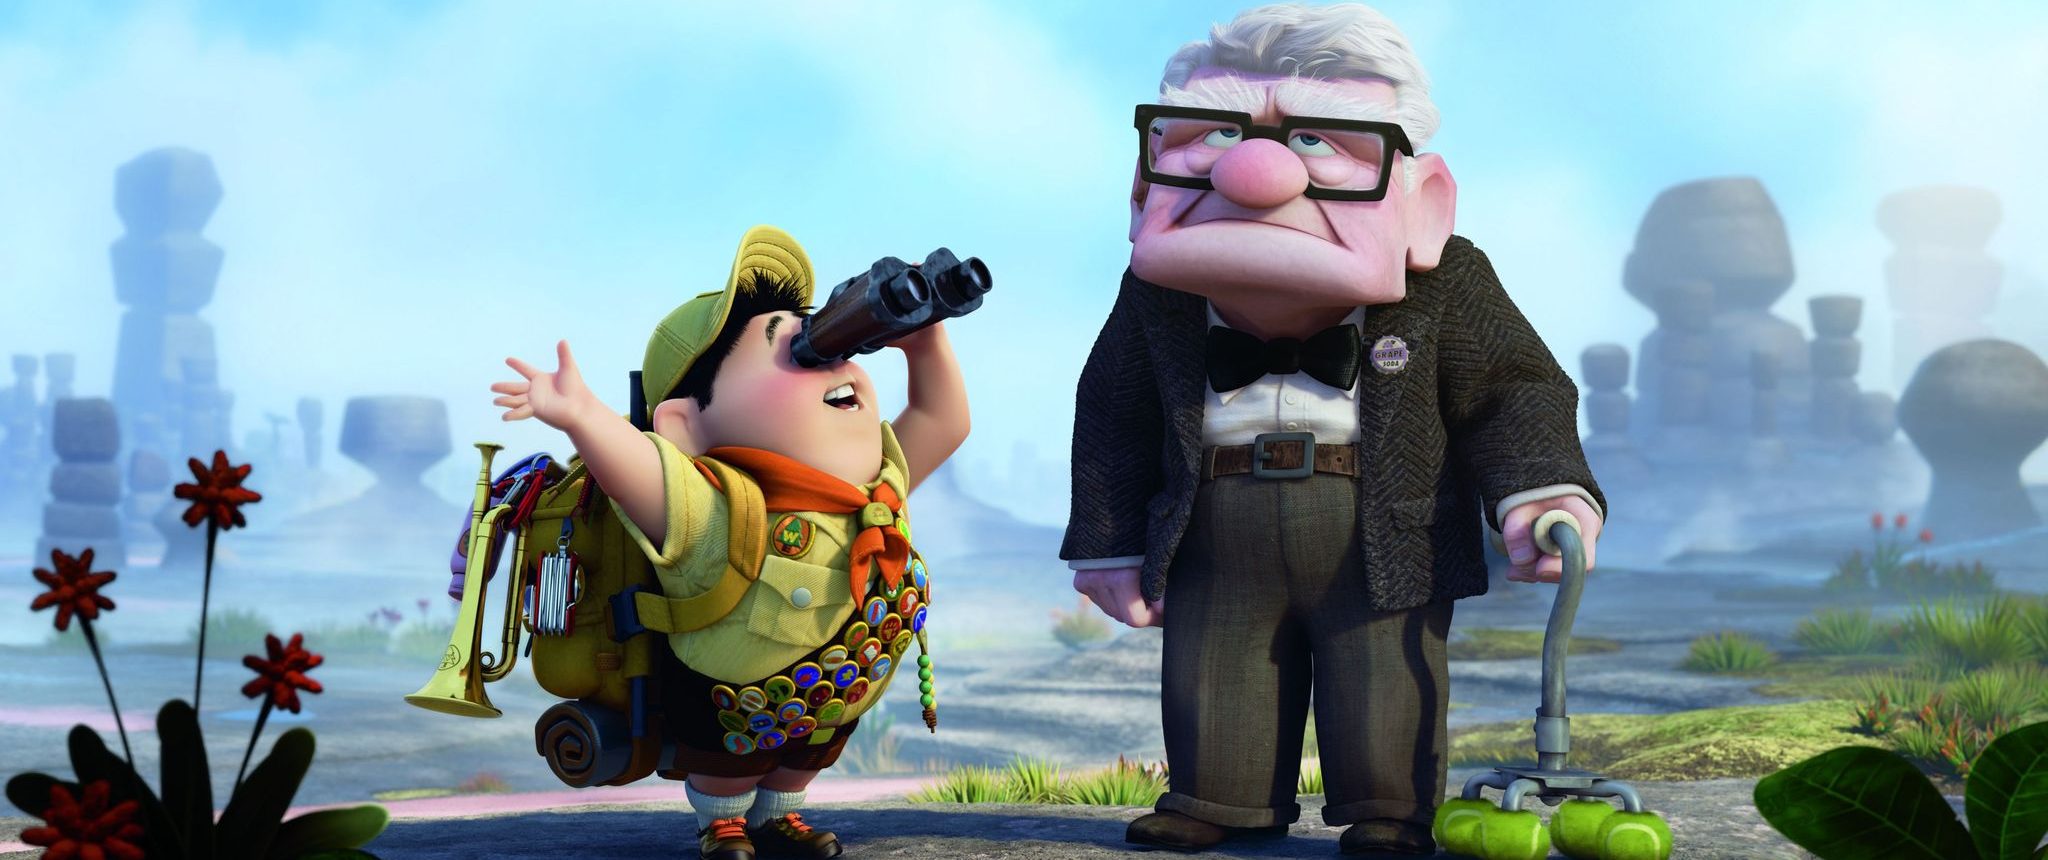 Is The Movie Up Based on a True Story?